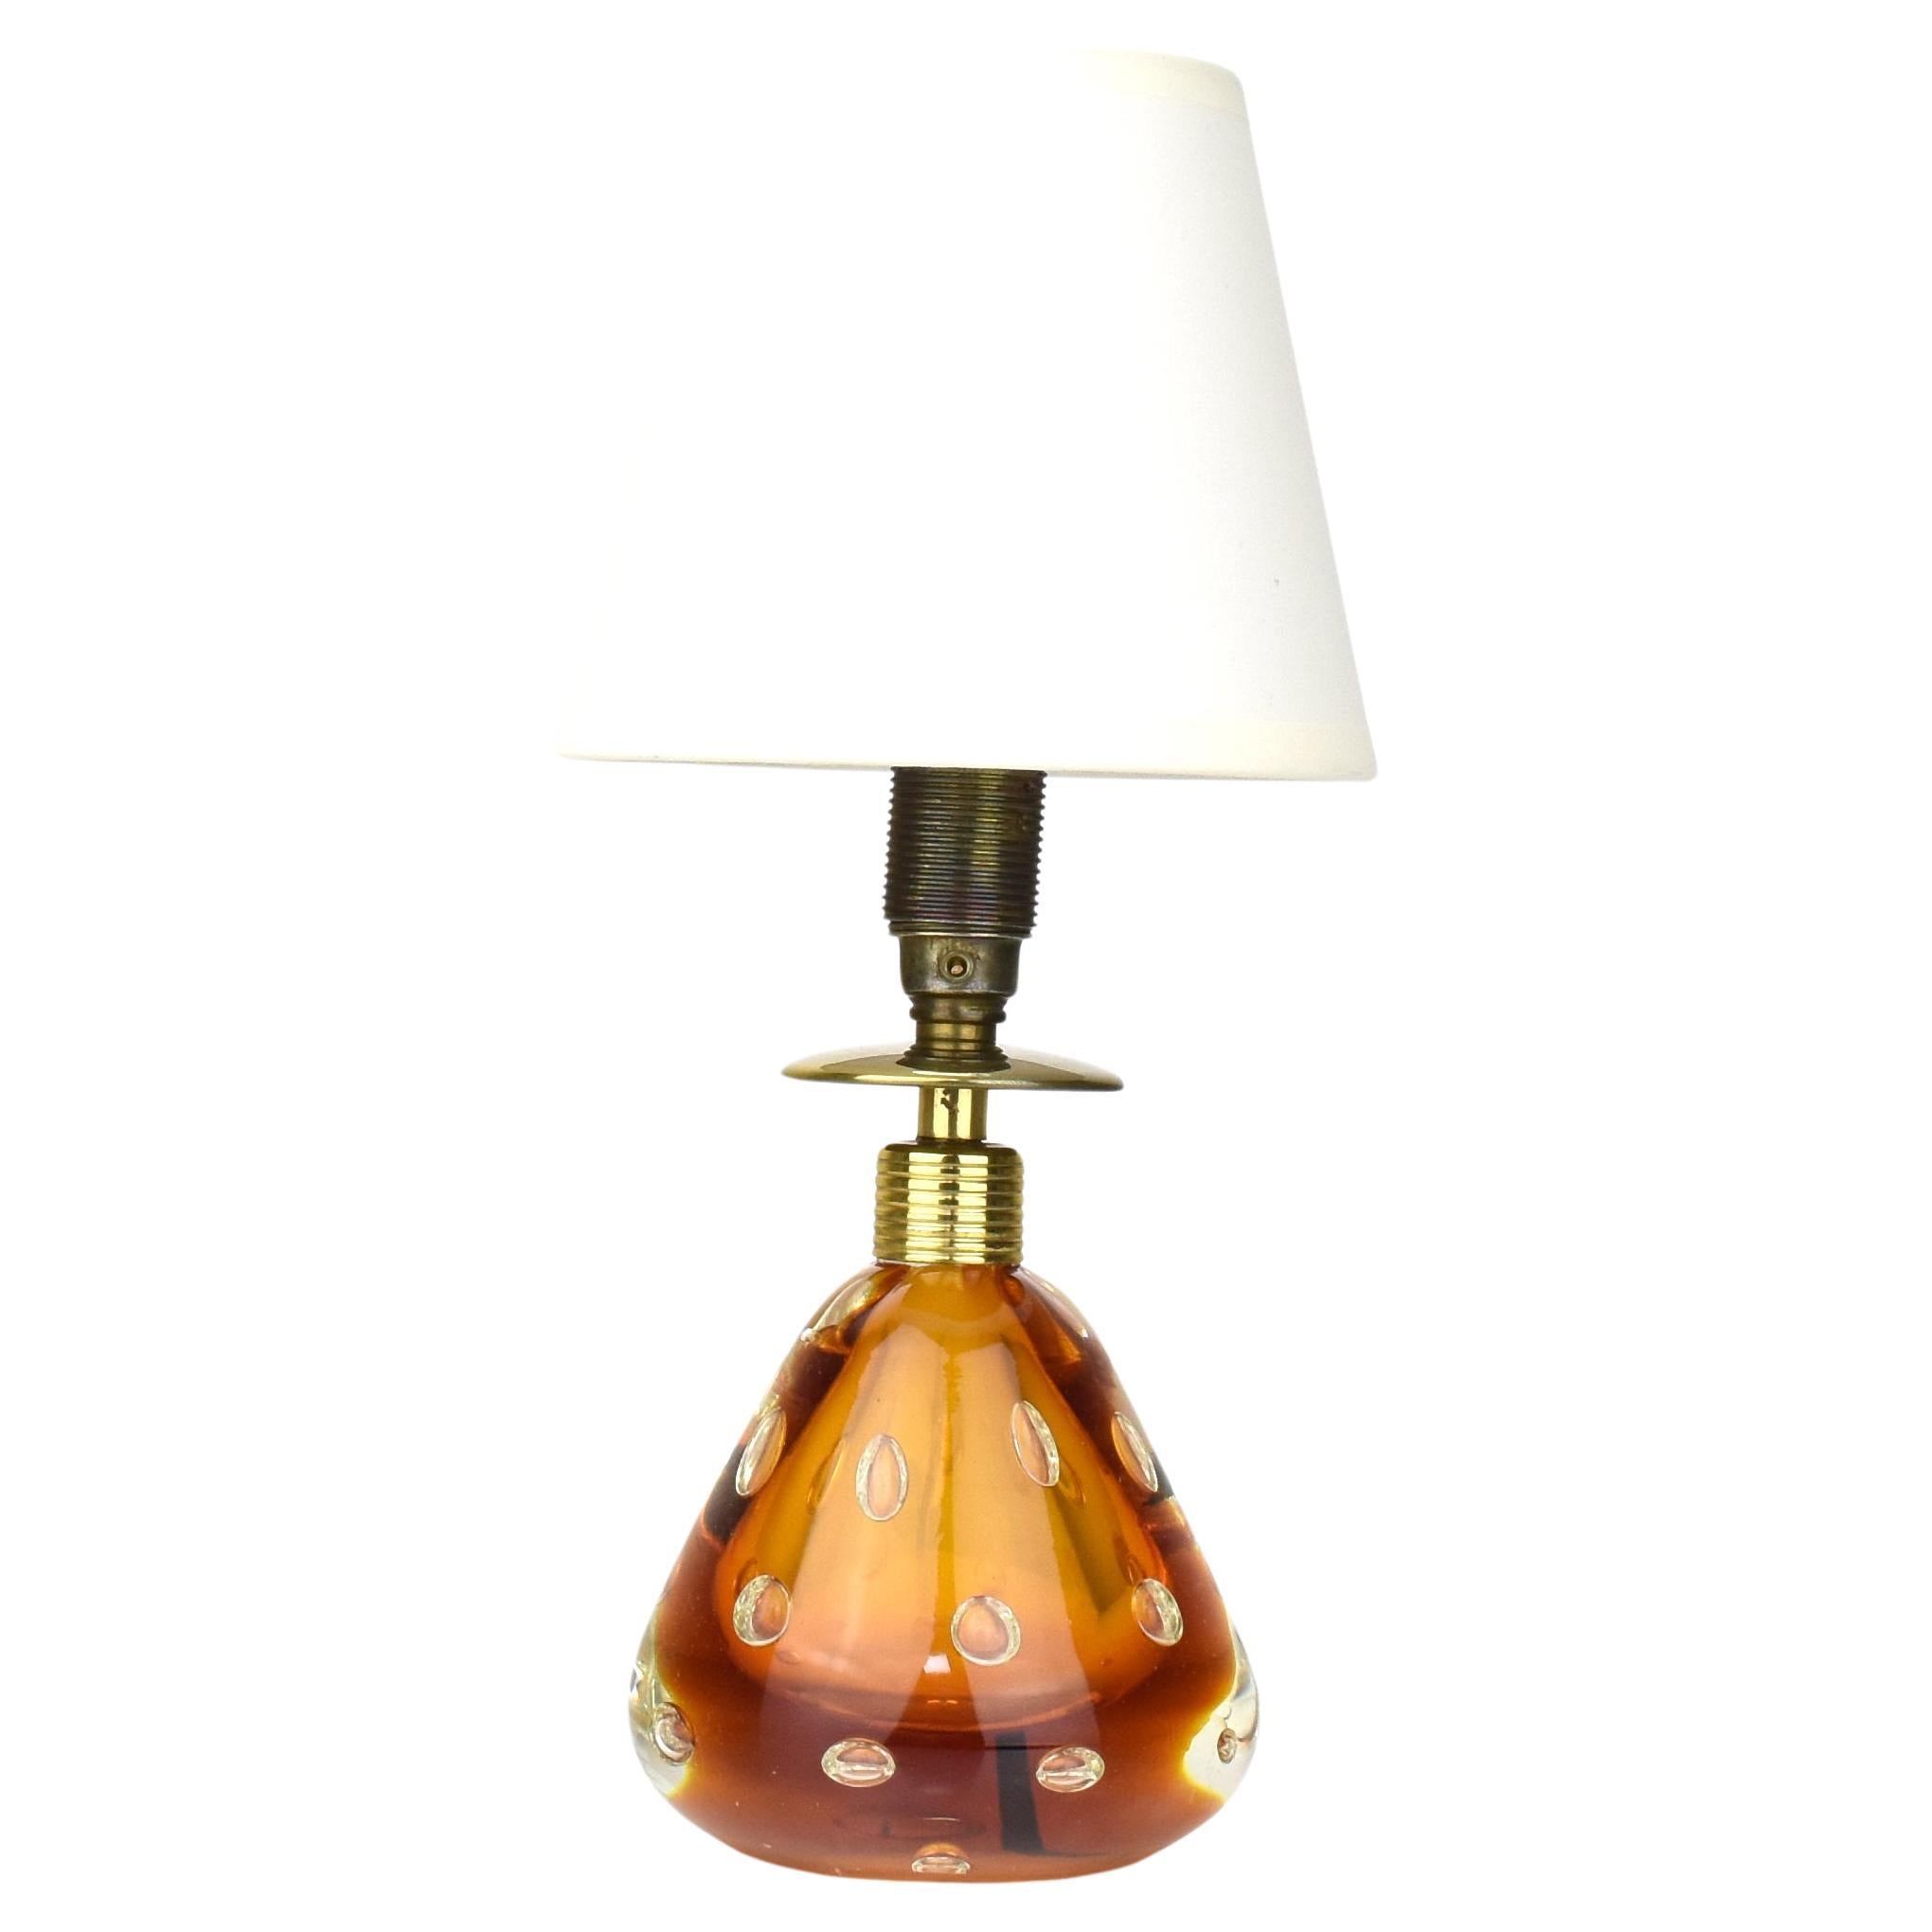 Pietro Toso for Fratelli Toso Murano Sommerso Amber Art Glass Table Lamp 1950s en vente